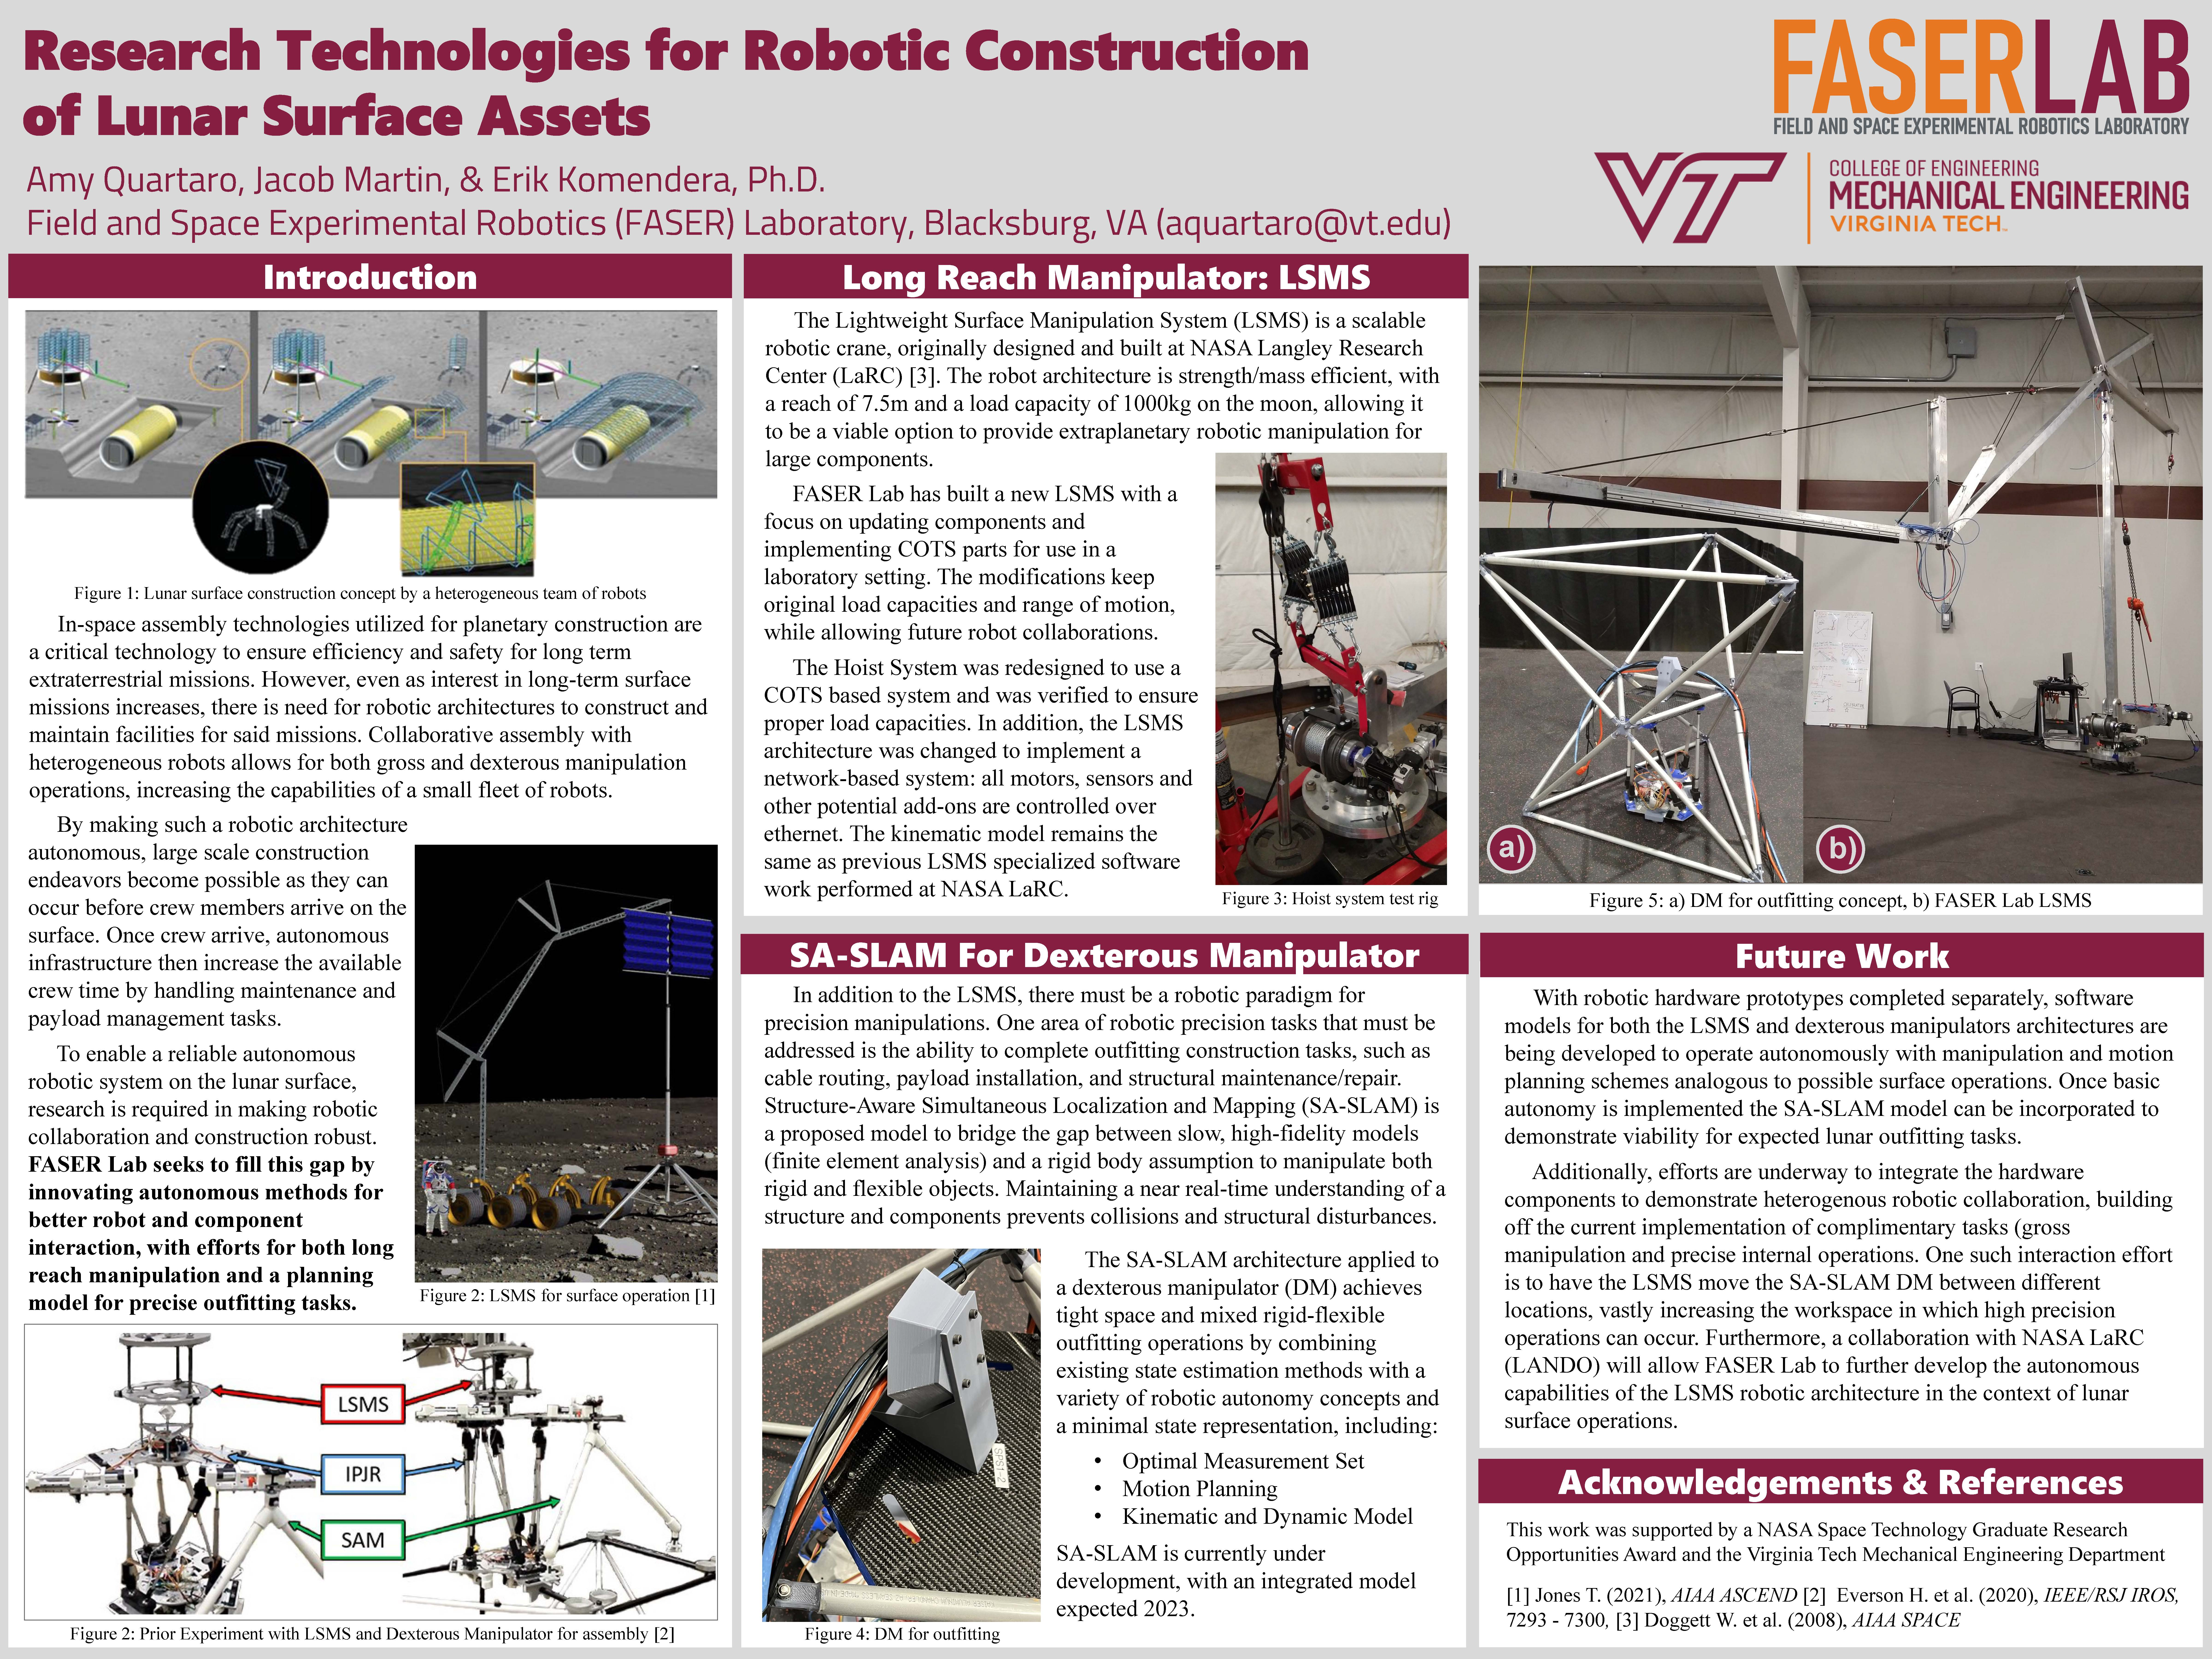 Research Technologies for Robotic Construction of Lunar Surface Assets